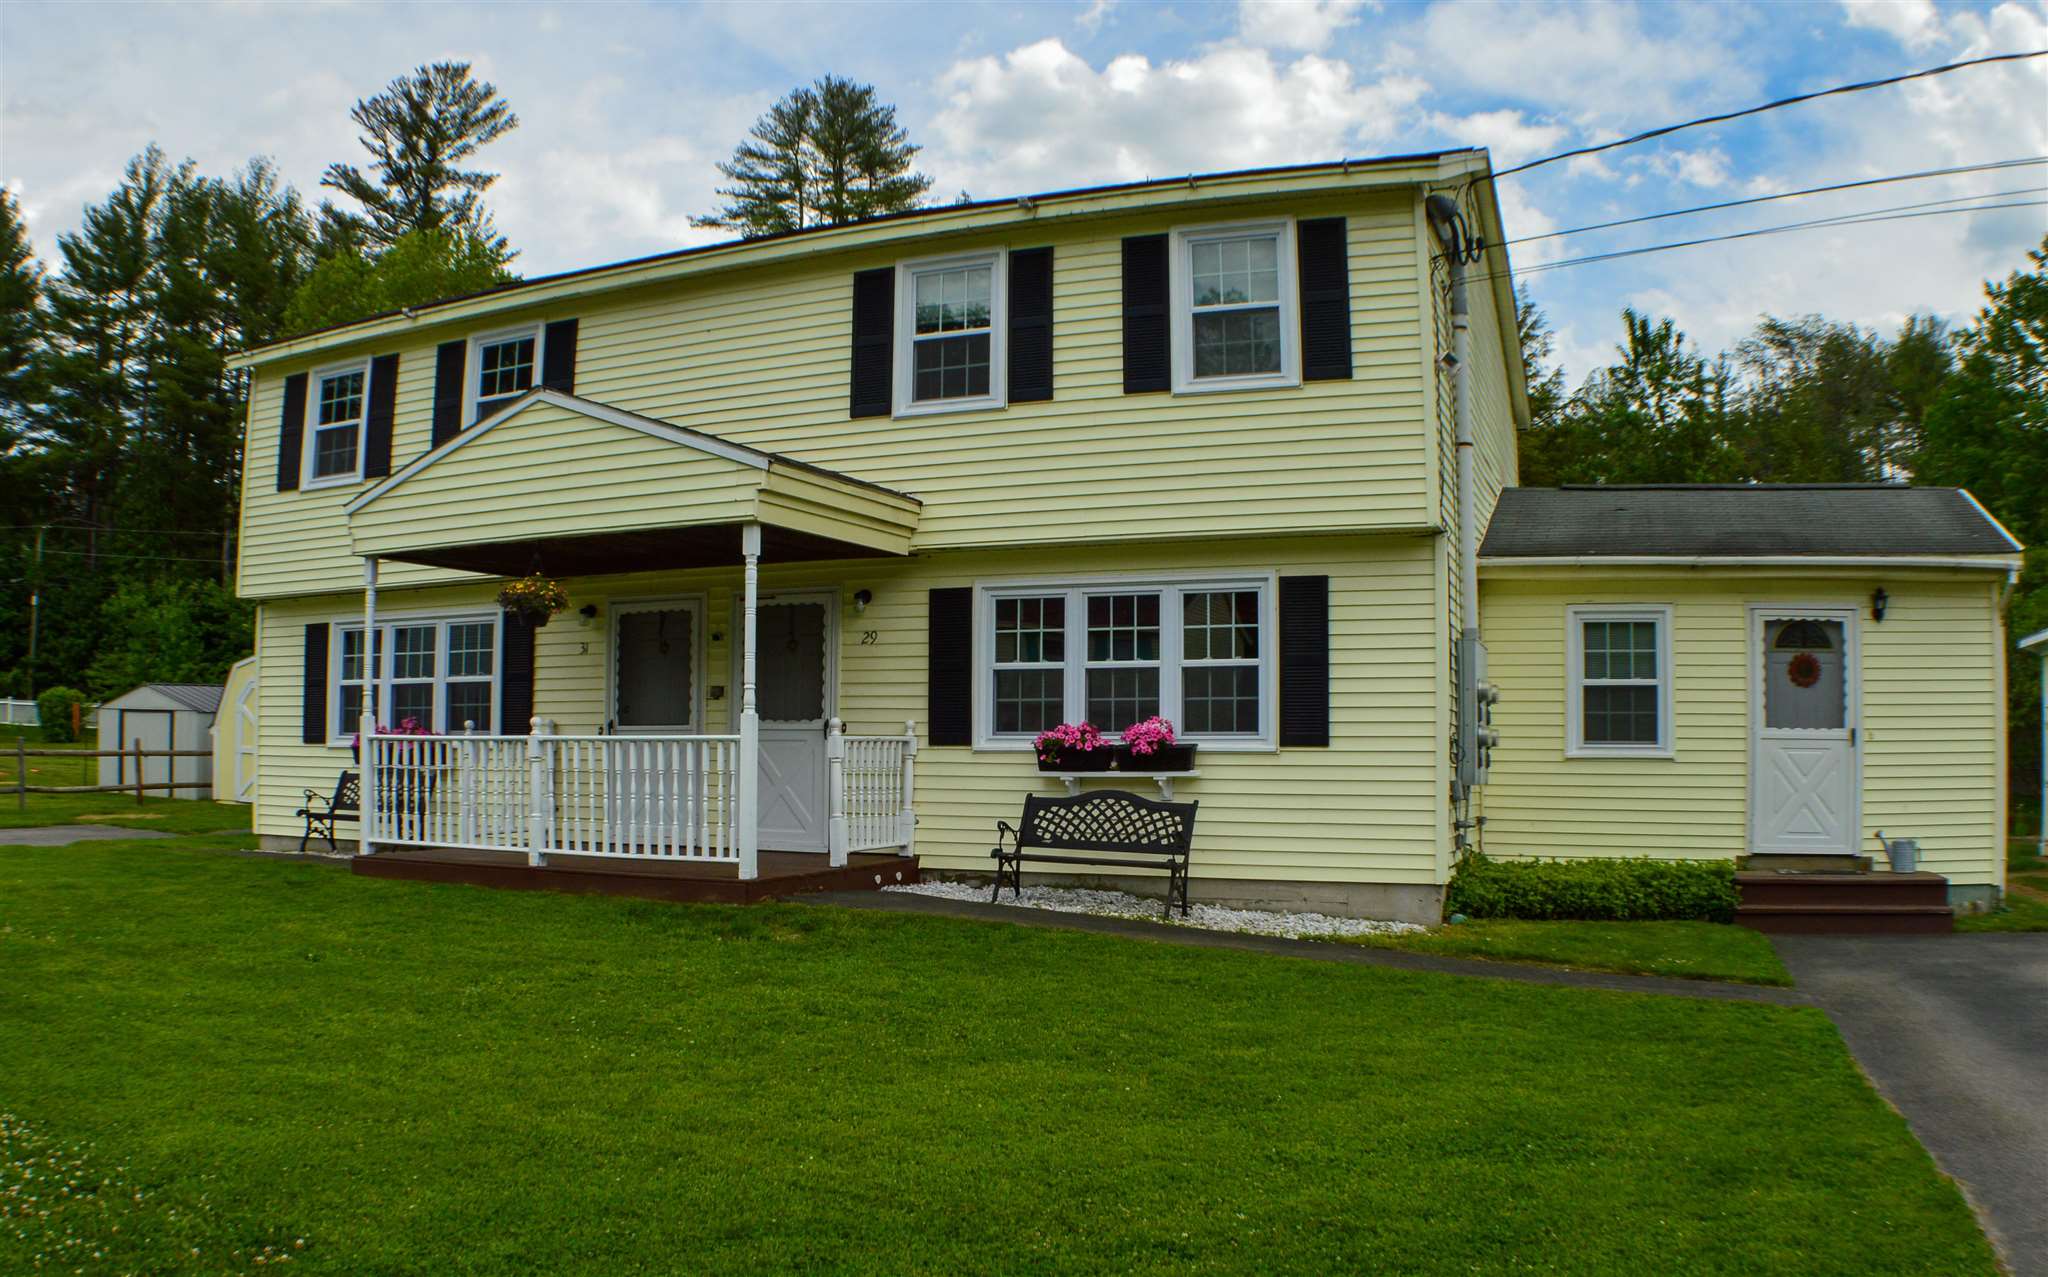 29-31 Townhouse Road Allenstown, NH Photo